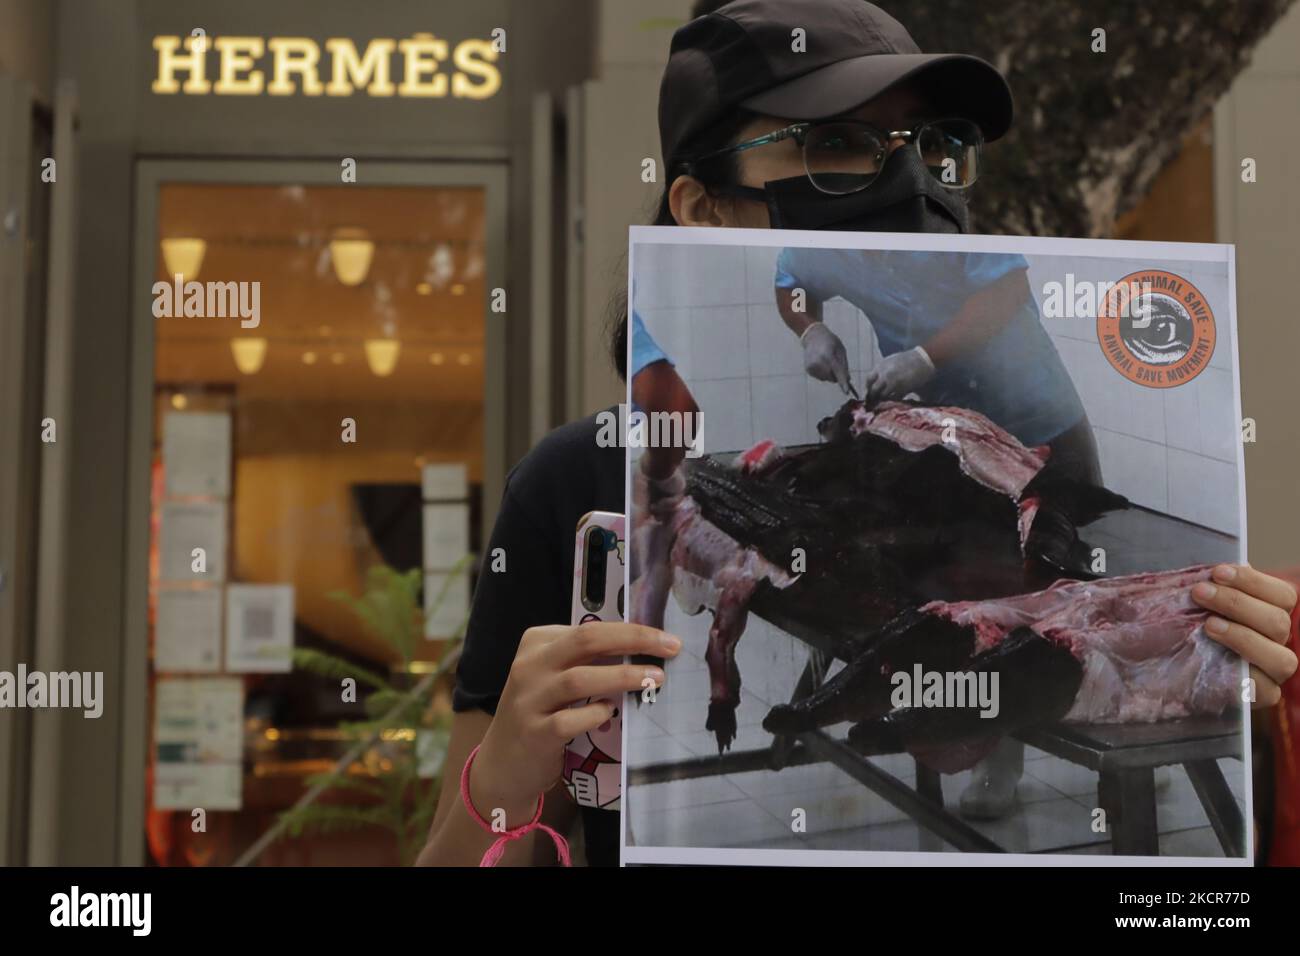 Protest against crocodile skins outside Hermes in Bond St - Buy, Sell or  Upload Video Content with Newsflare